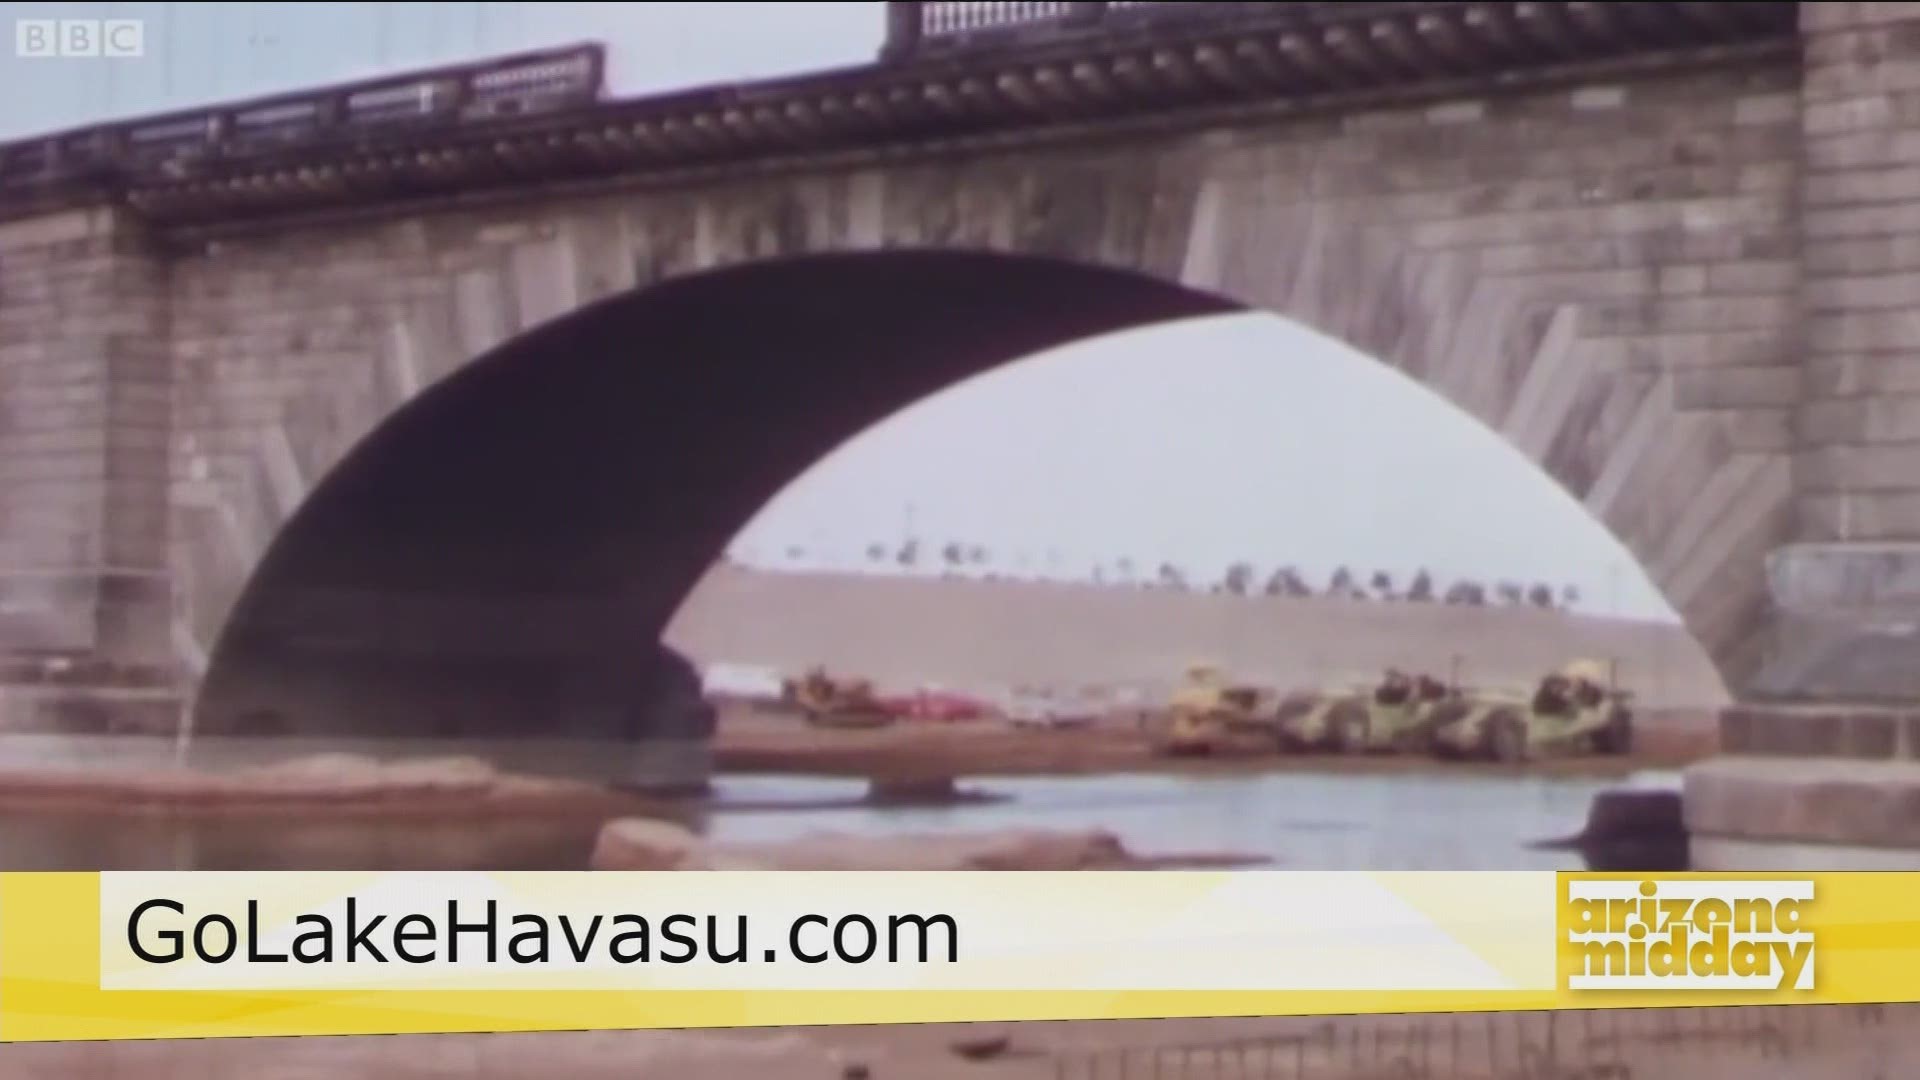 Jan Kassies tells us the story behind Arizona's most visited tourist attraction, London Bridge, and shows us how to find a vortex in Lake Havasu.